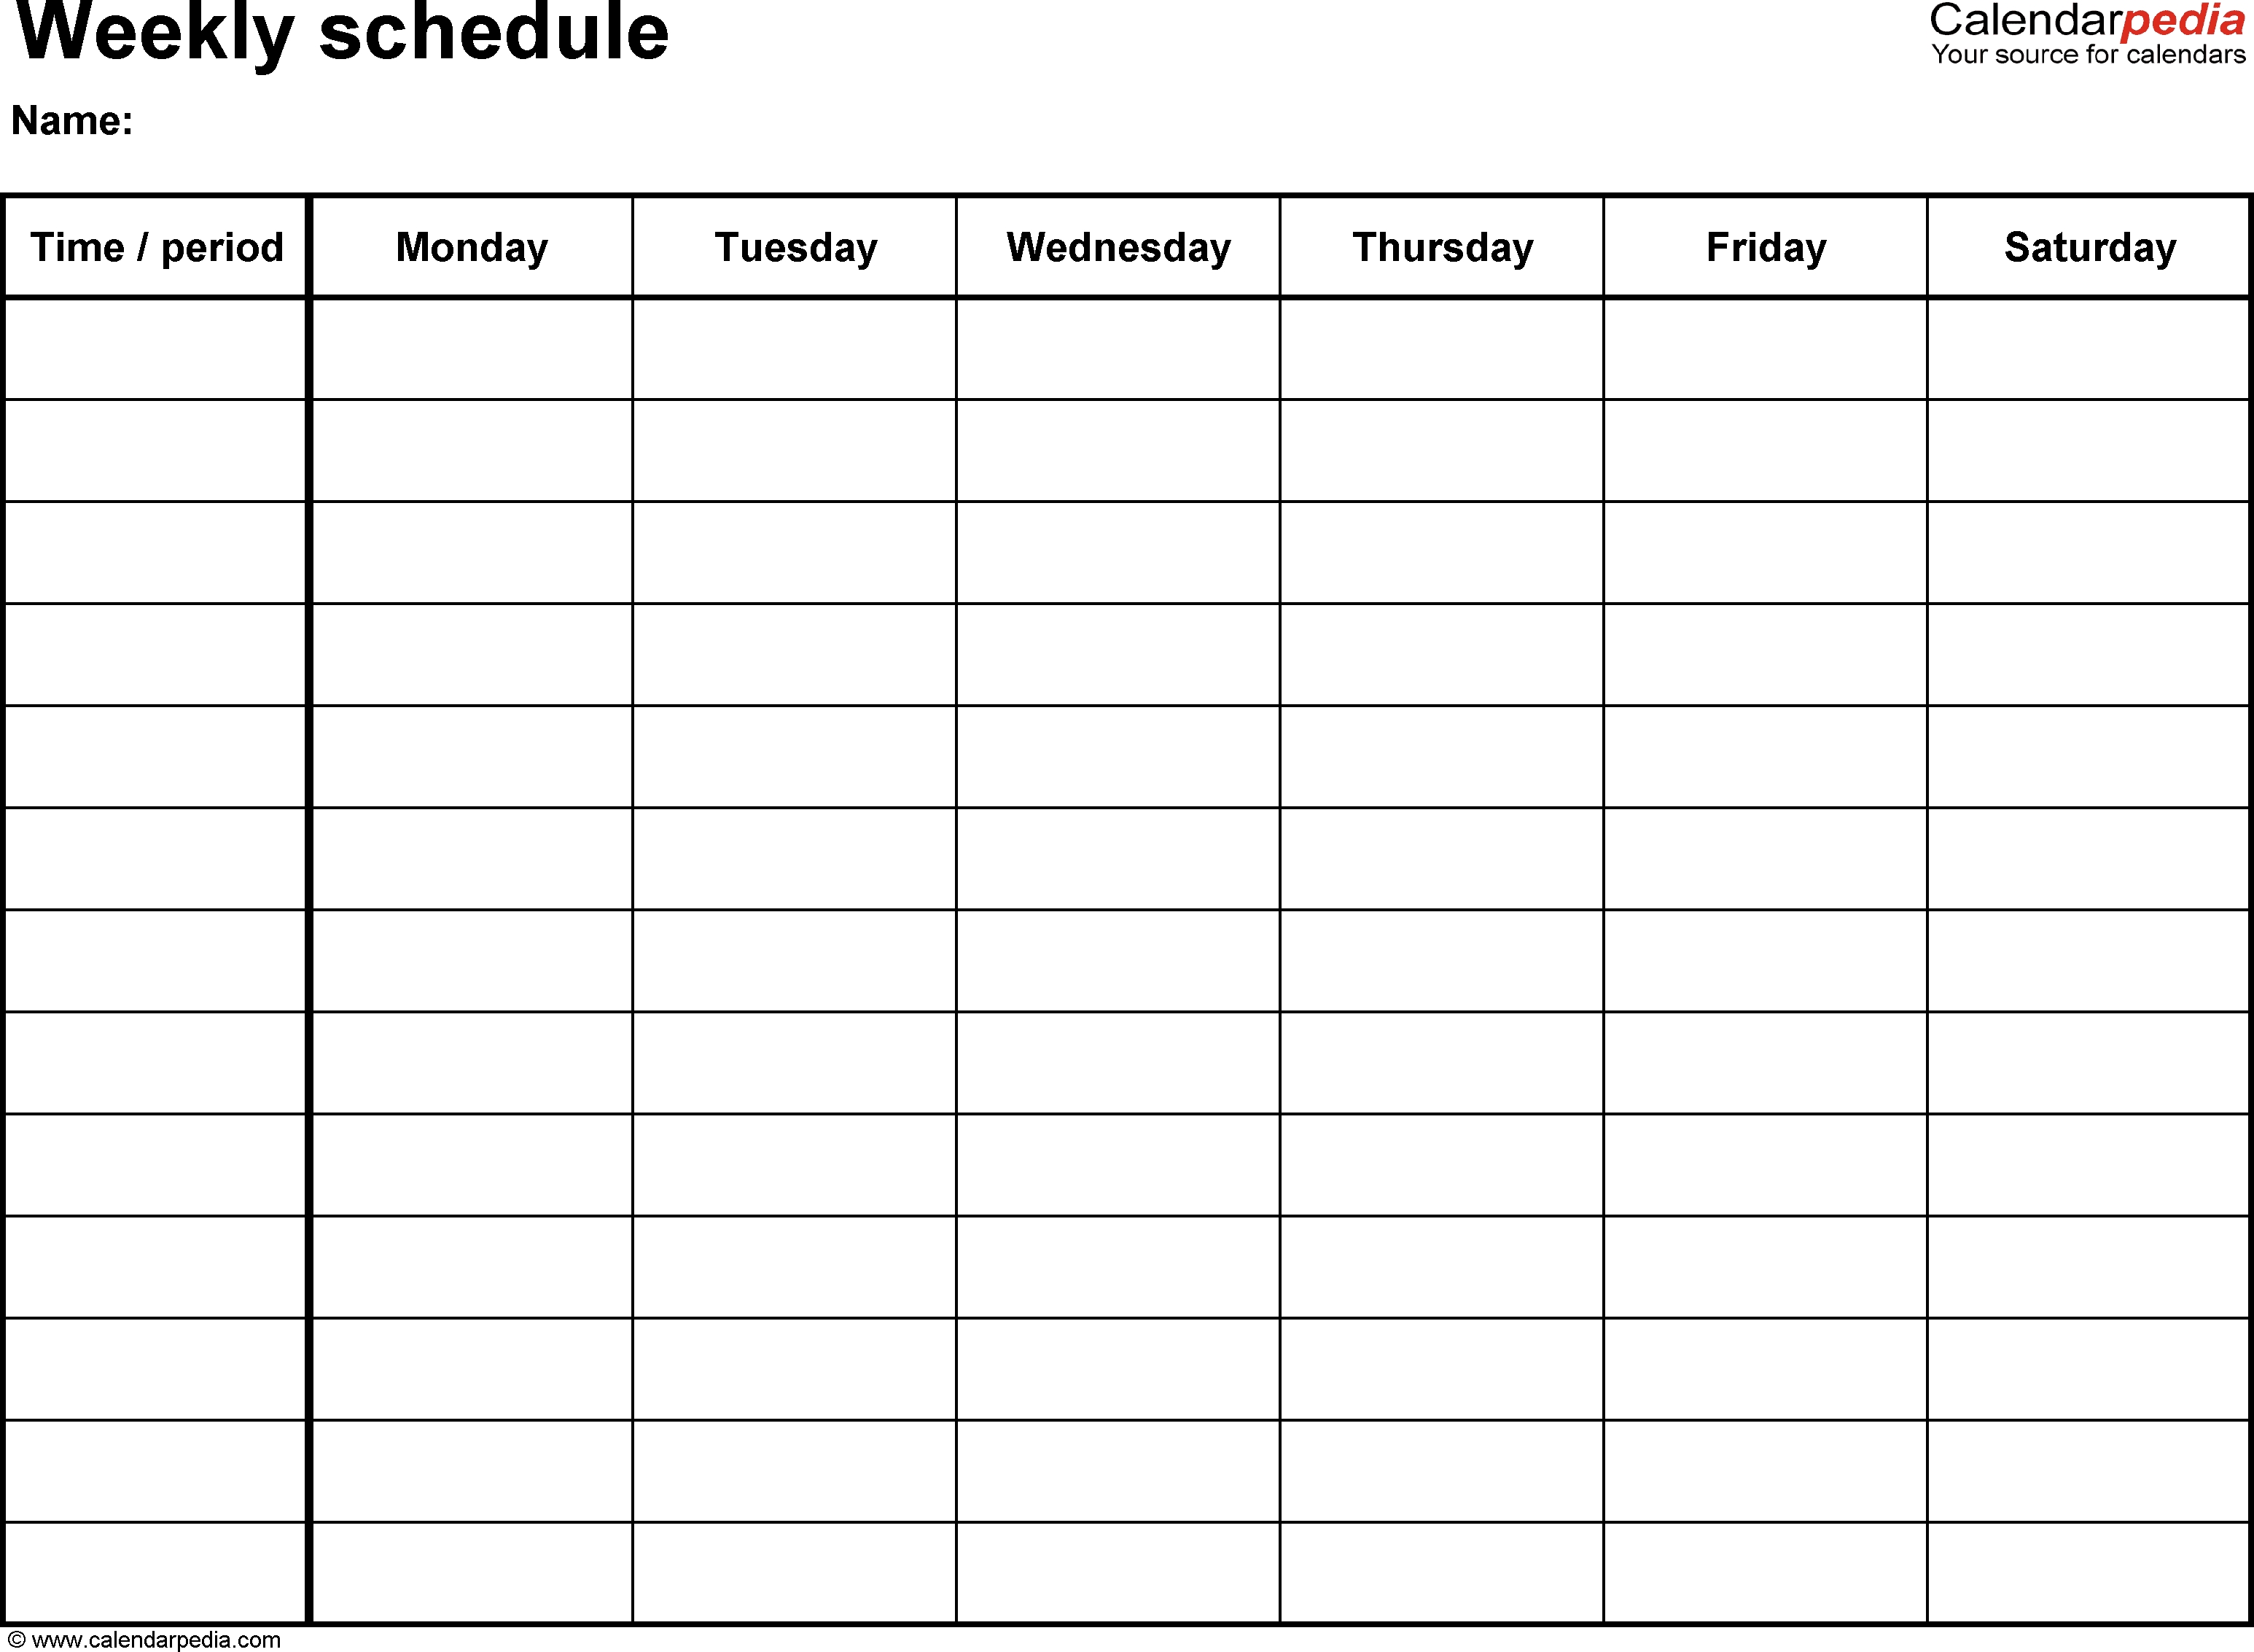 Free Weekly Schedule Templates For Word - 18 Templates Incredible Blank Calendar Template 6 Weeks